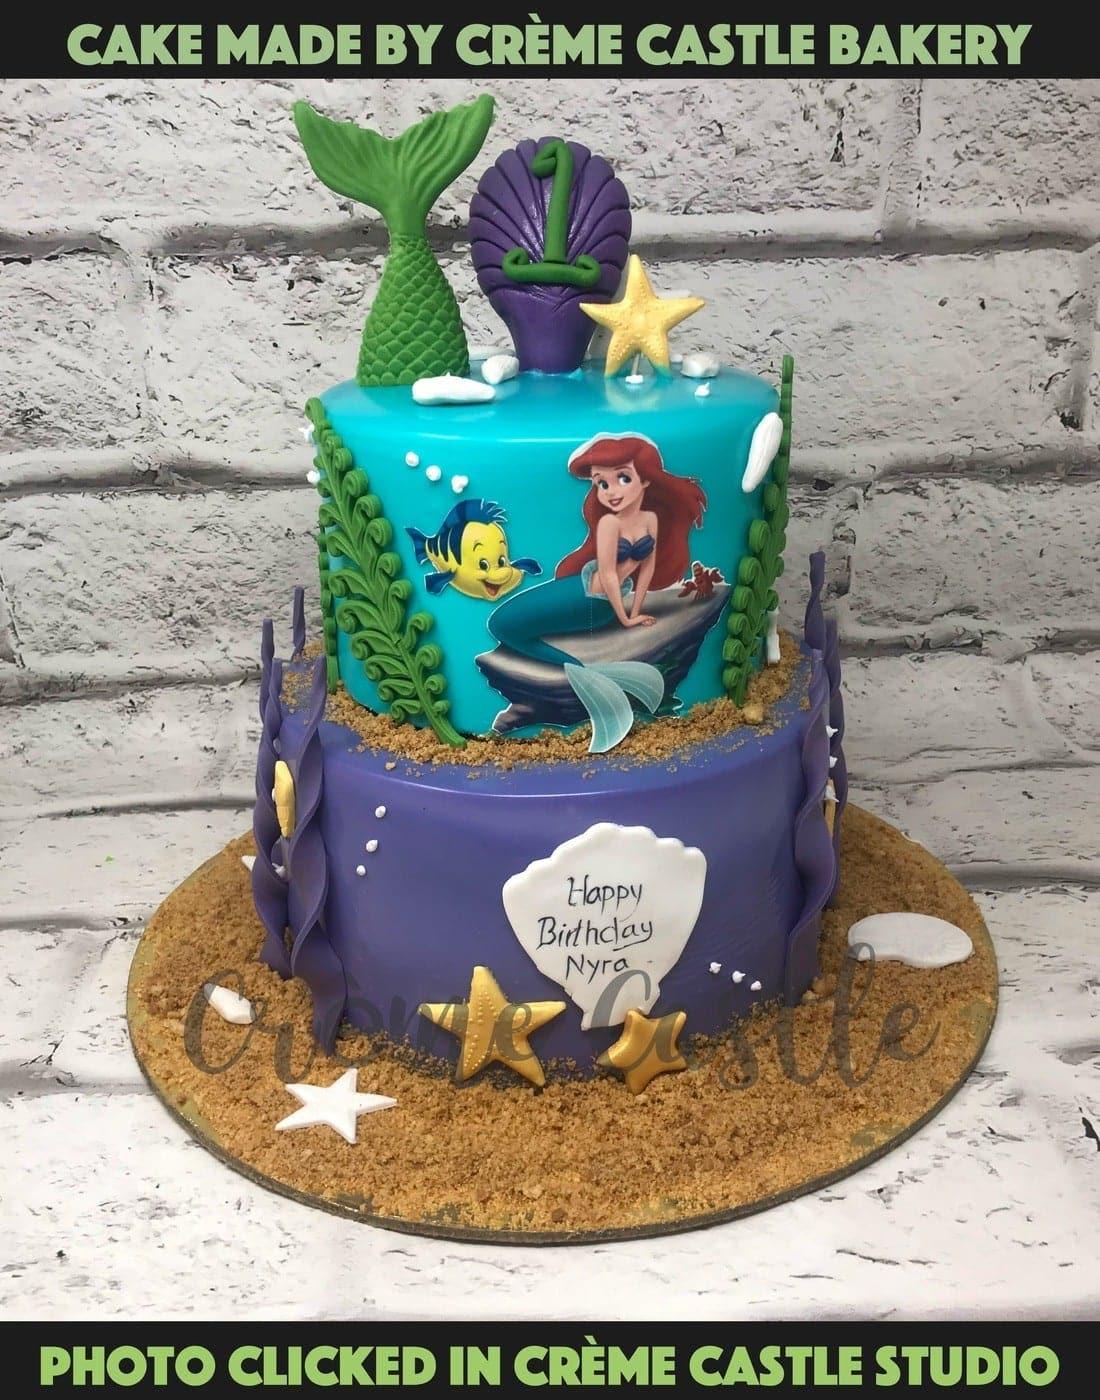 Mermaid Theme Cake in 2 Tier by Creme Castle